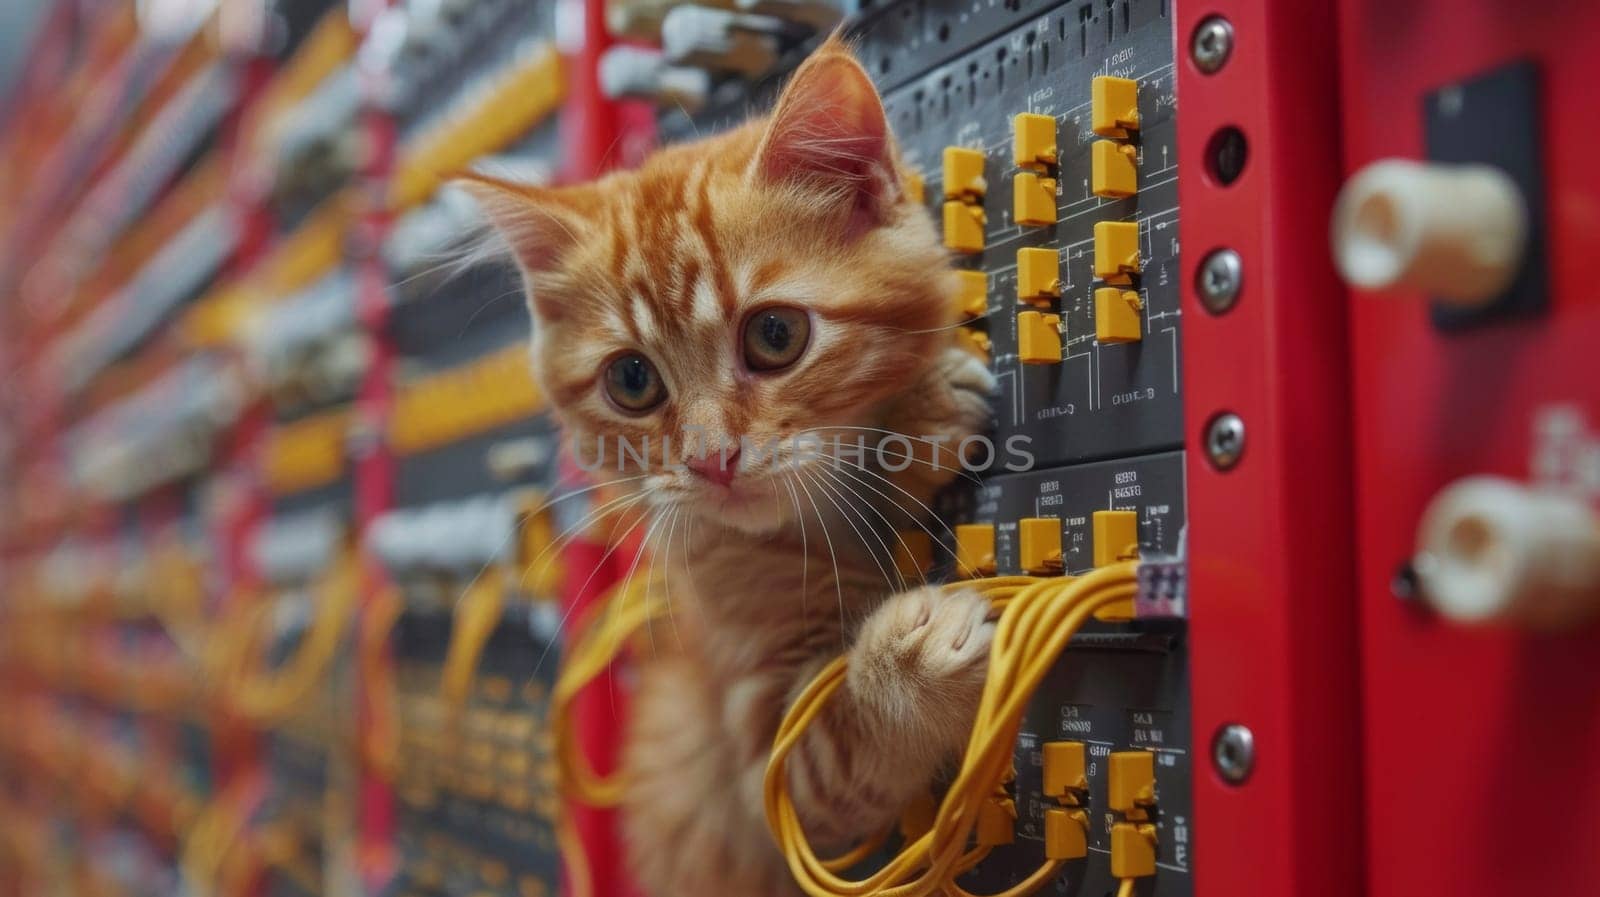 A cat is climbing on a wall of wires and switches, AI by starush